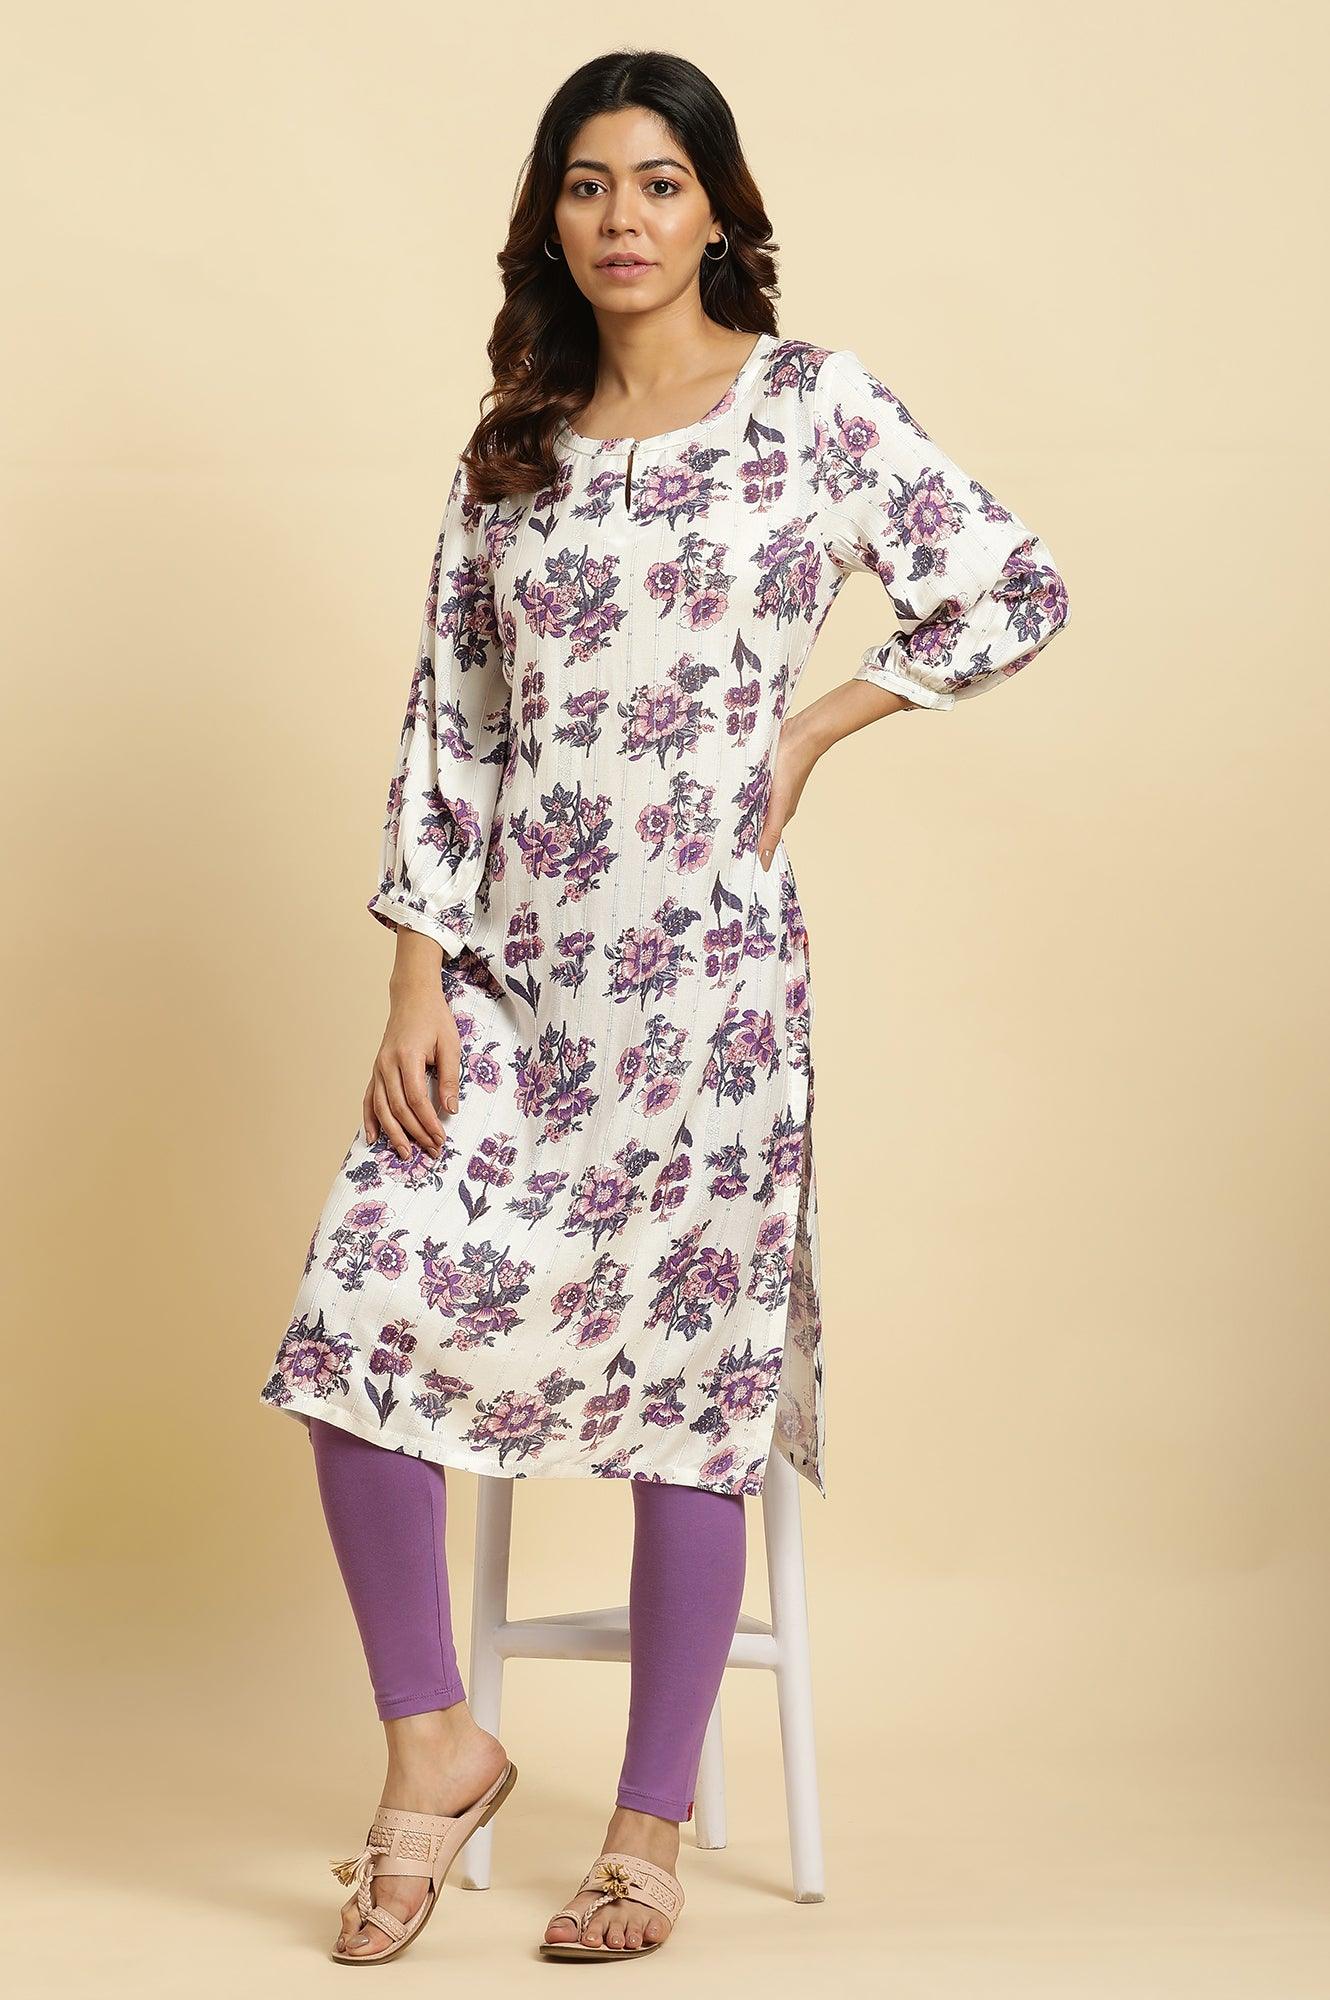 Ecru Relaxed Fit Straight Kurta With Purple Floral Print - wforwoman